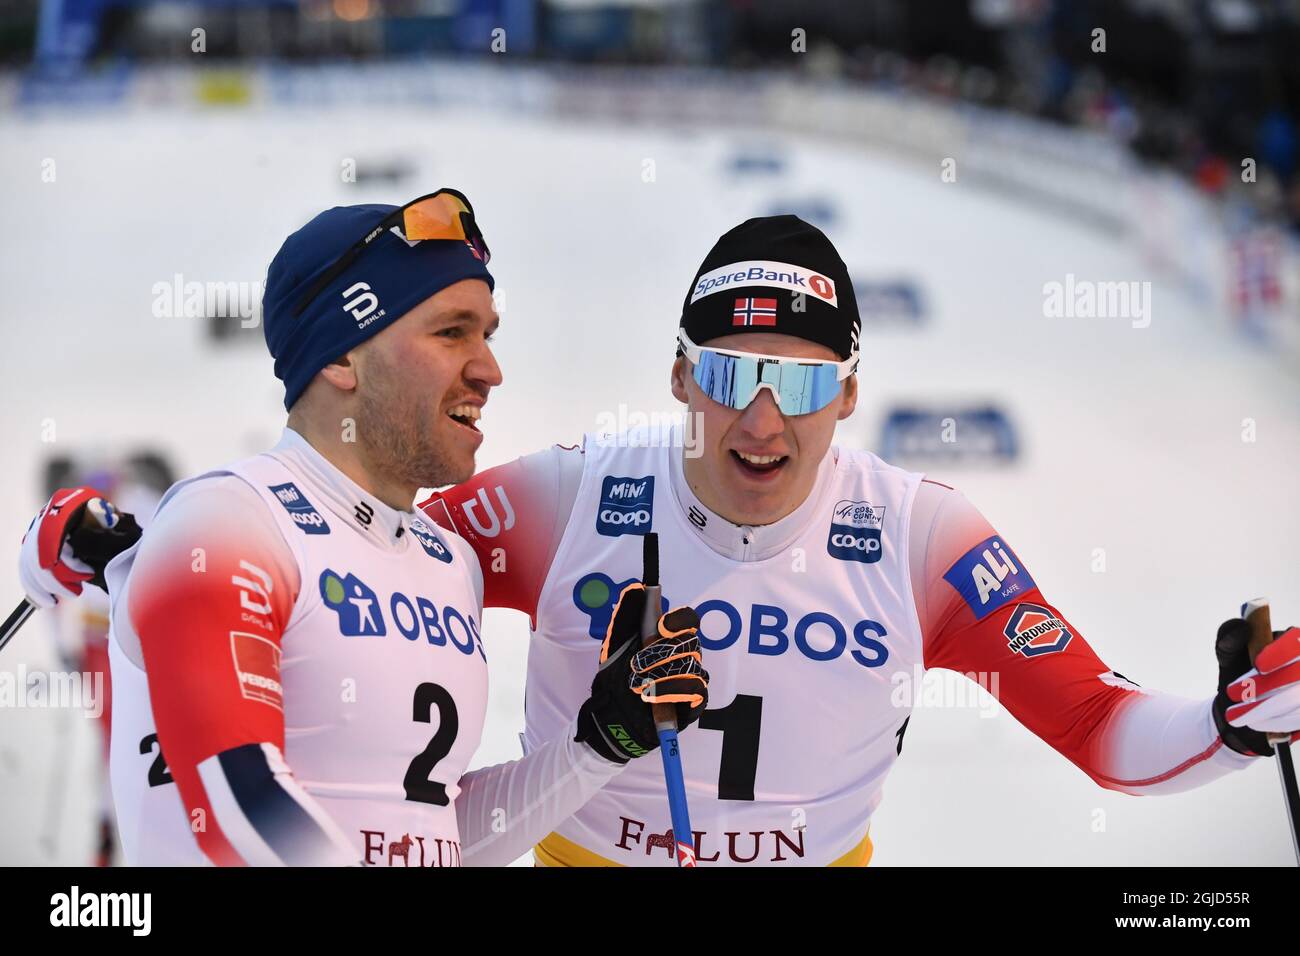 Norway's Paal Golberg winner (2) and Erik Valness (1) of Norway second place during men's sprint at the FIS Cross Country Skiing World Cup in Falun, Sweden, Feb. 08, 2020. Photo: Henrik Montgomery / TT Stock Photo